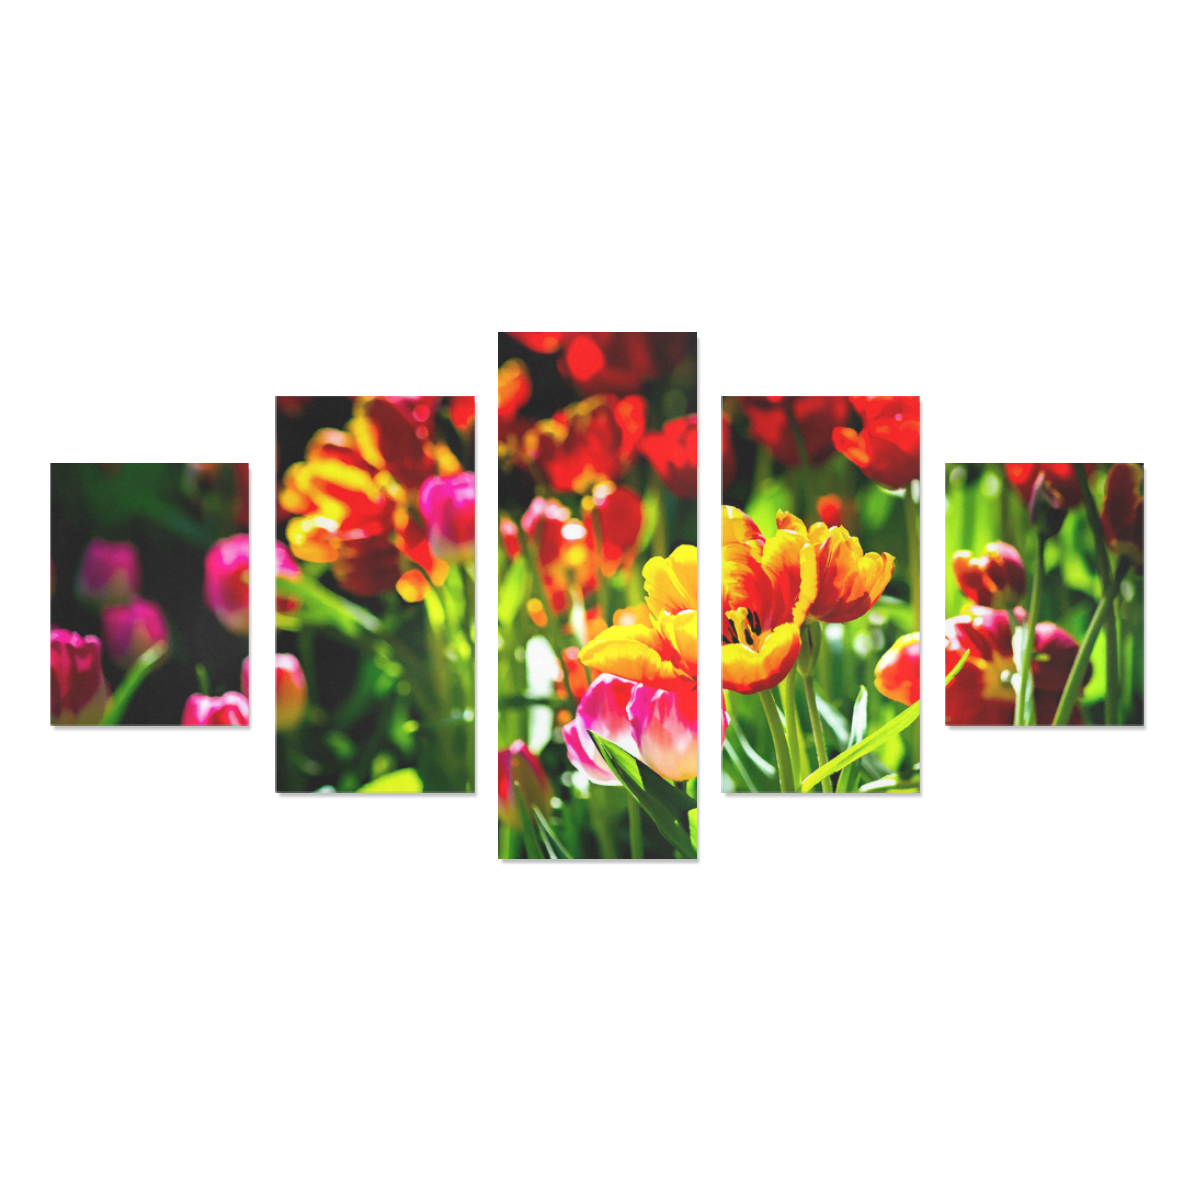 Colorful tulip flowers chic spring floral beauty Canvas Print Sets B (No Frame)